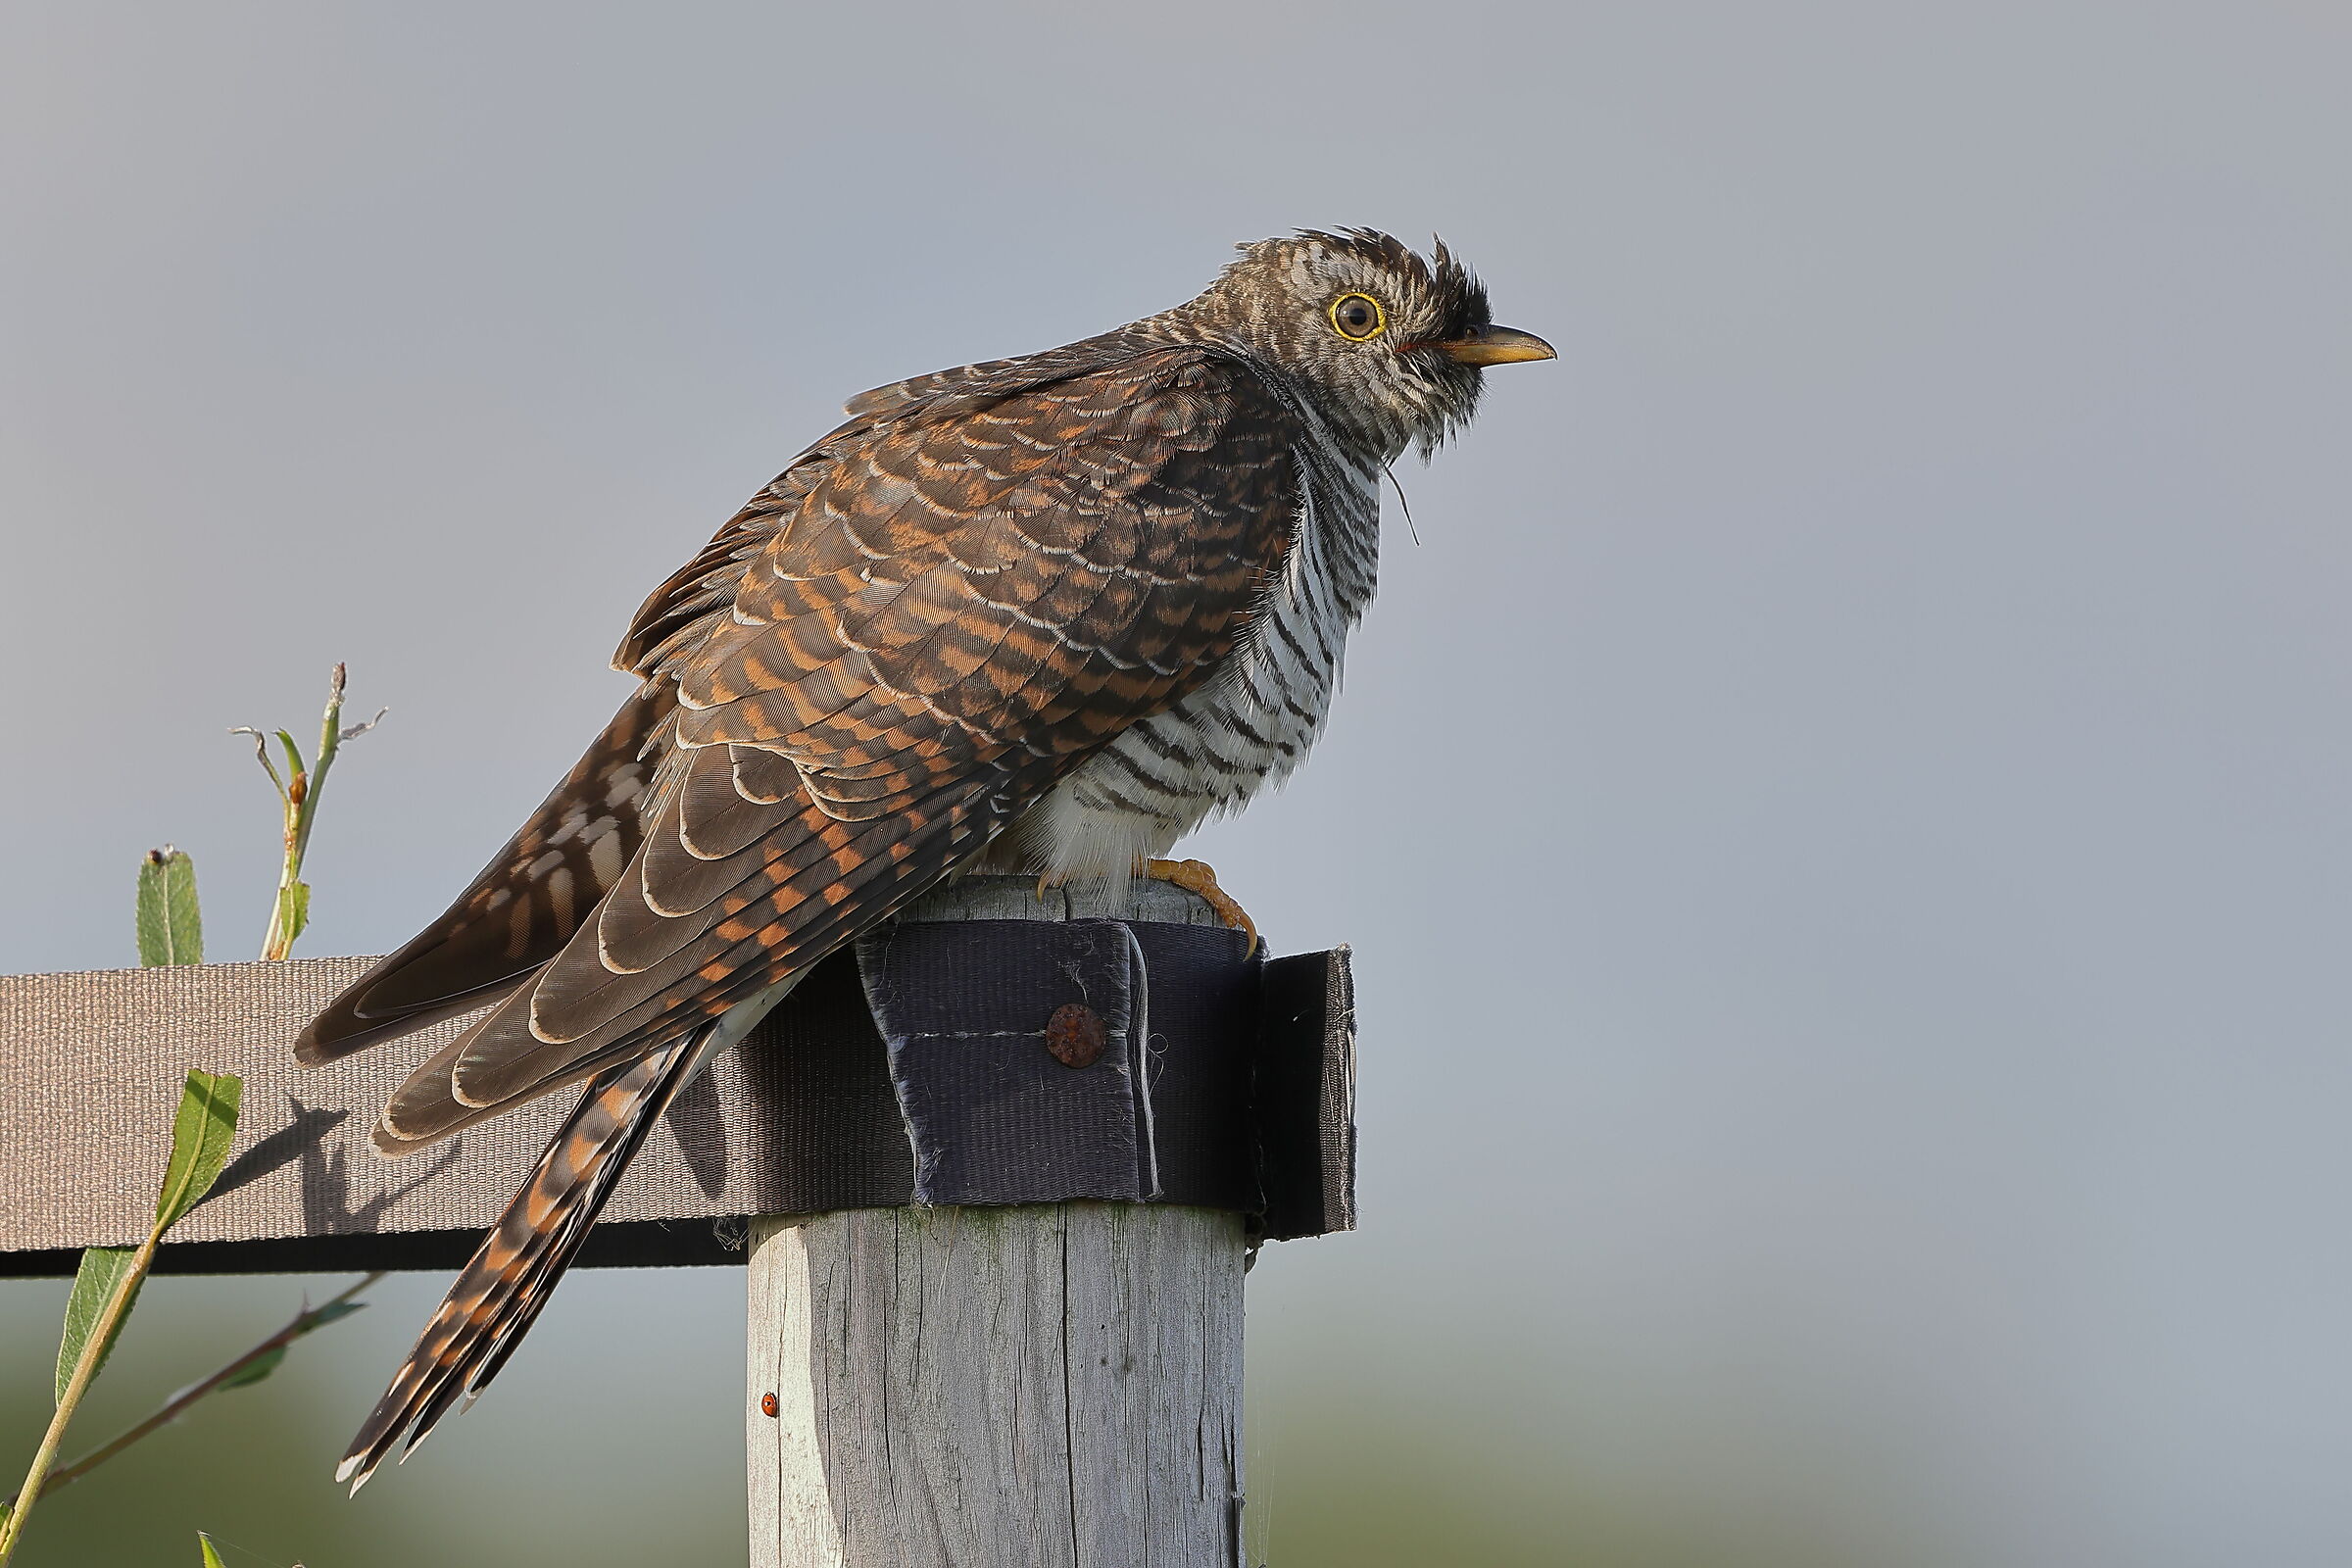 The Young Cuckoo...